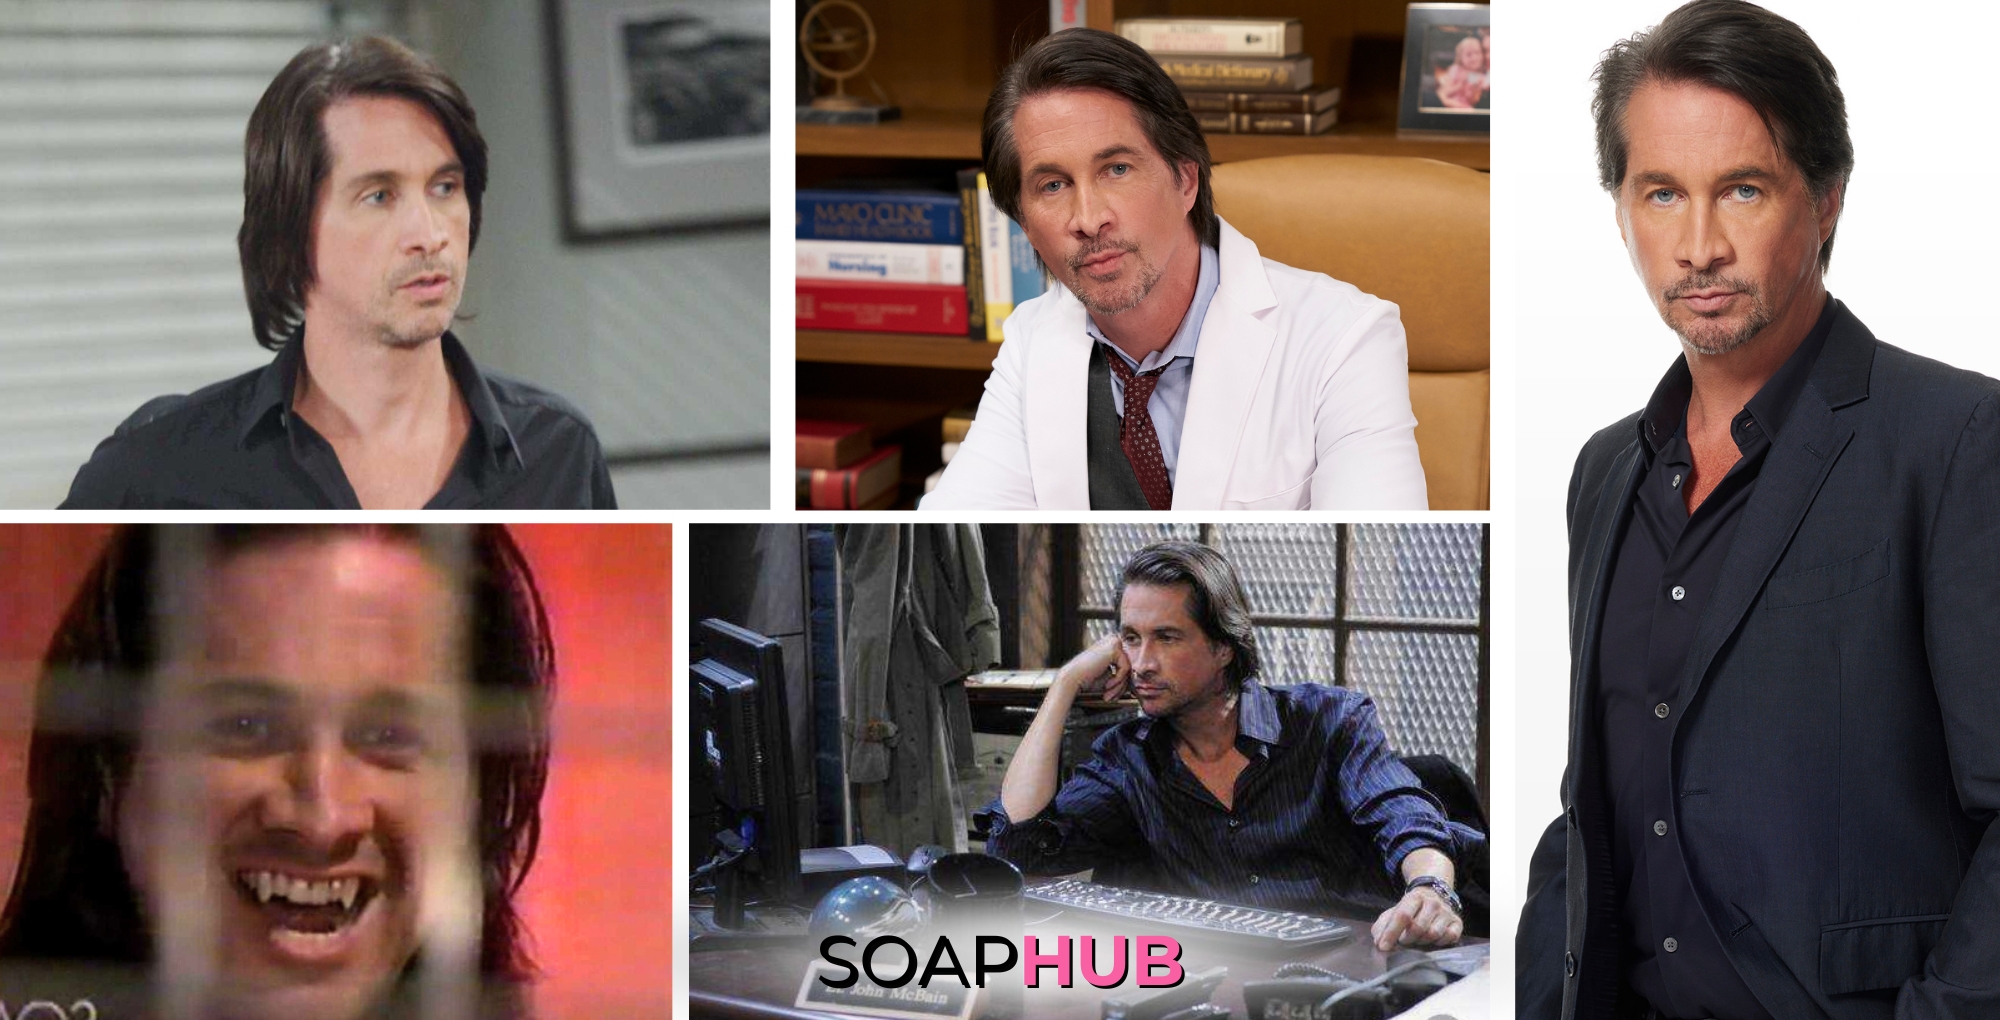 Michael Easton on General Hospital with the Soap Hub logo across the bottom.